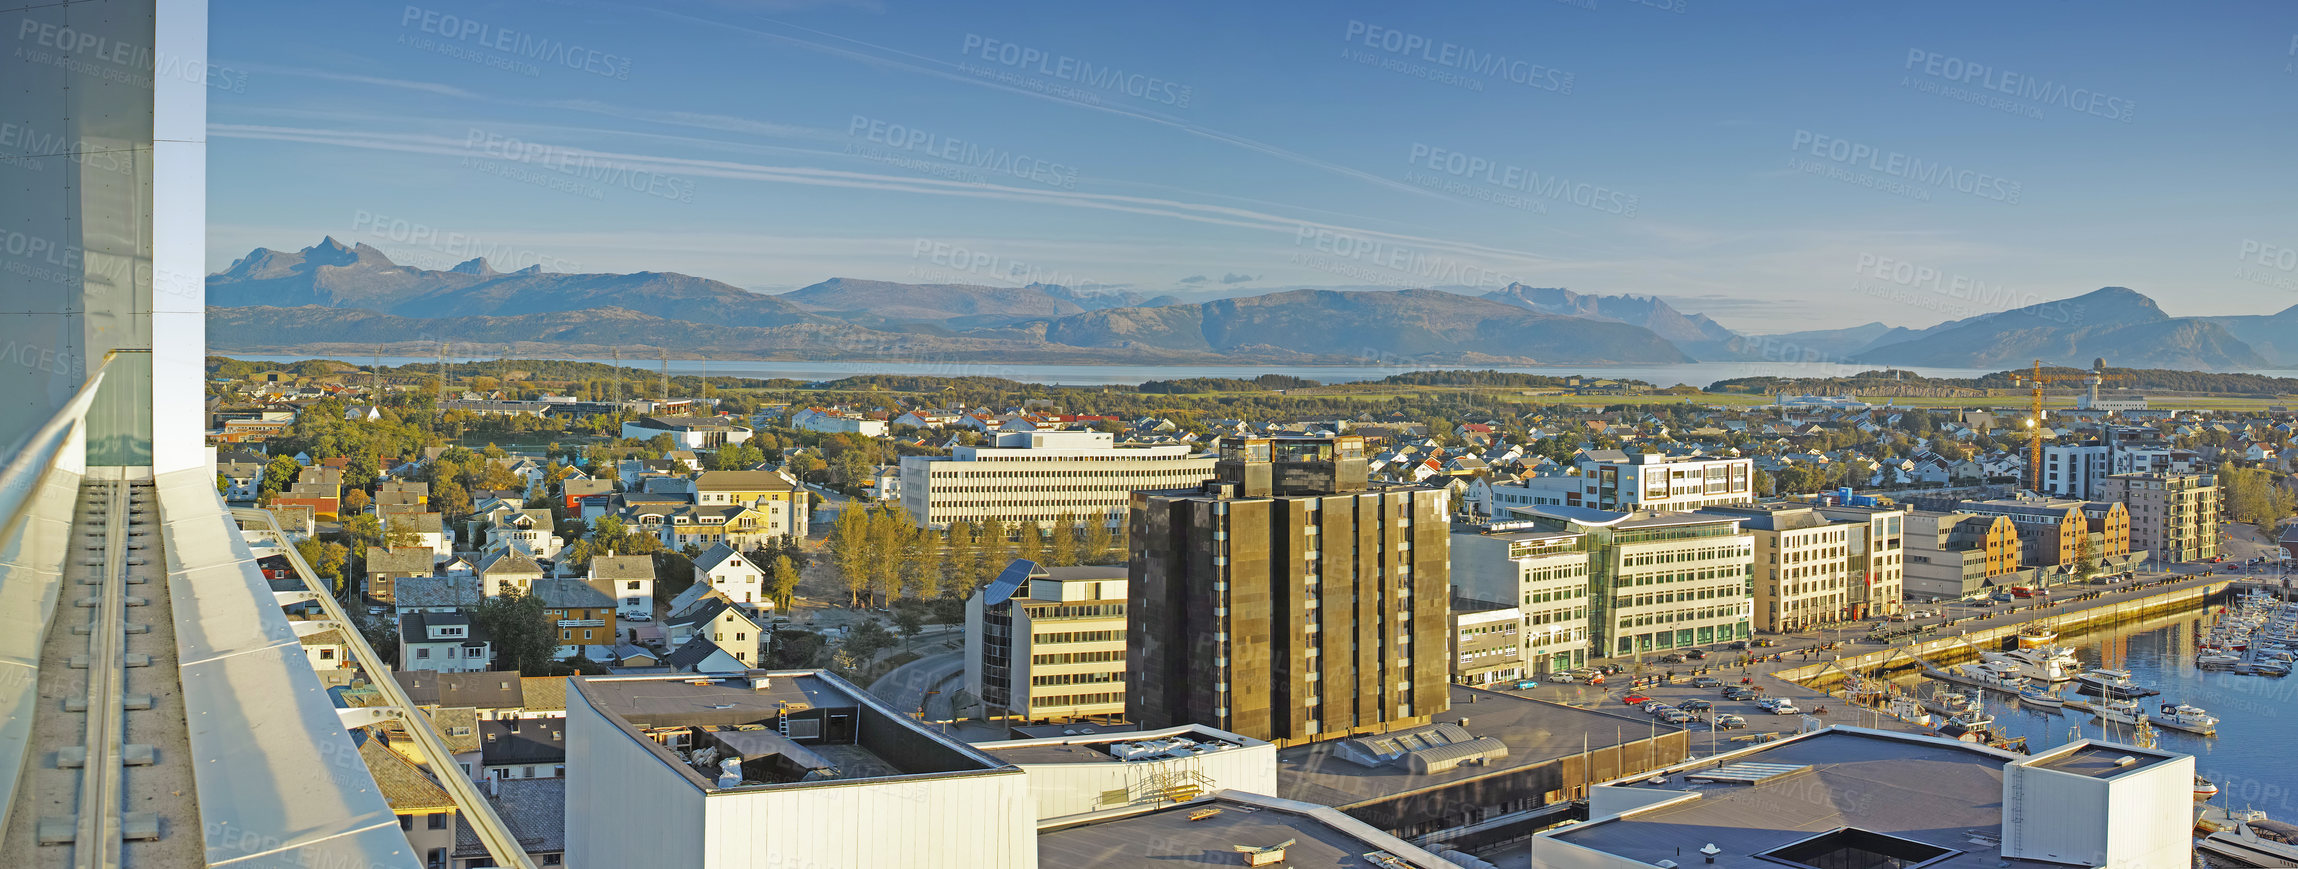 Buy stock photo Cityscape view of urban city buildings and infrastructure with background mountains in popular overseas travel destination. Busy downtown centre and urban architecture and blue sky in Bodo, Norway